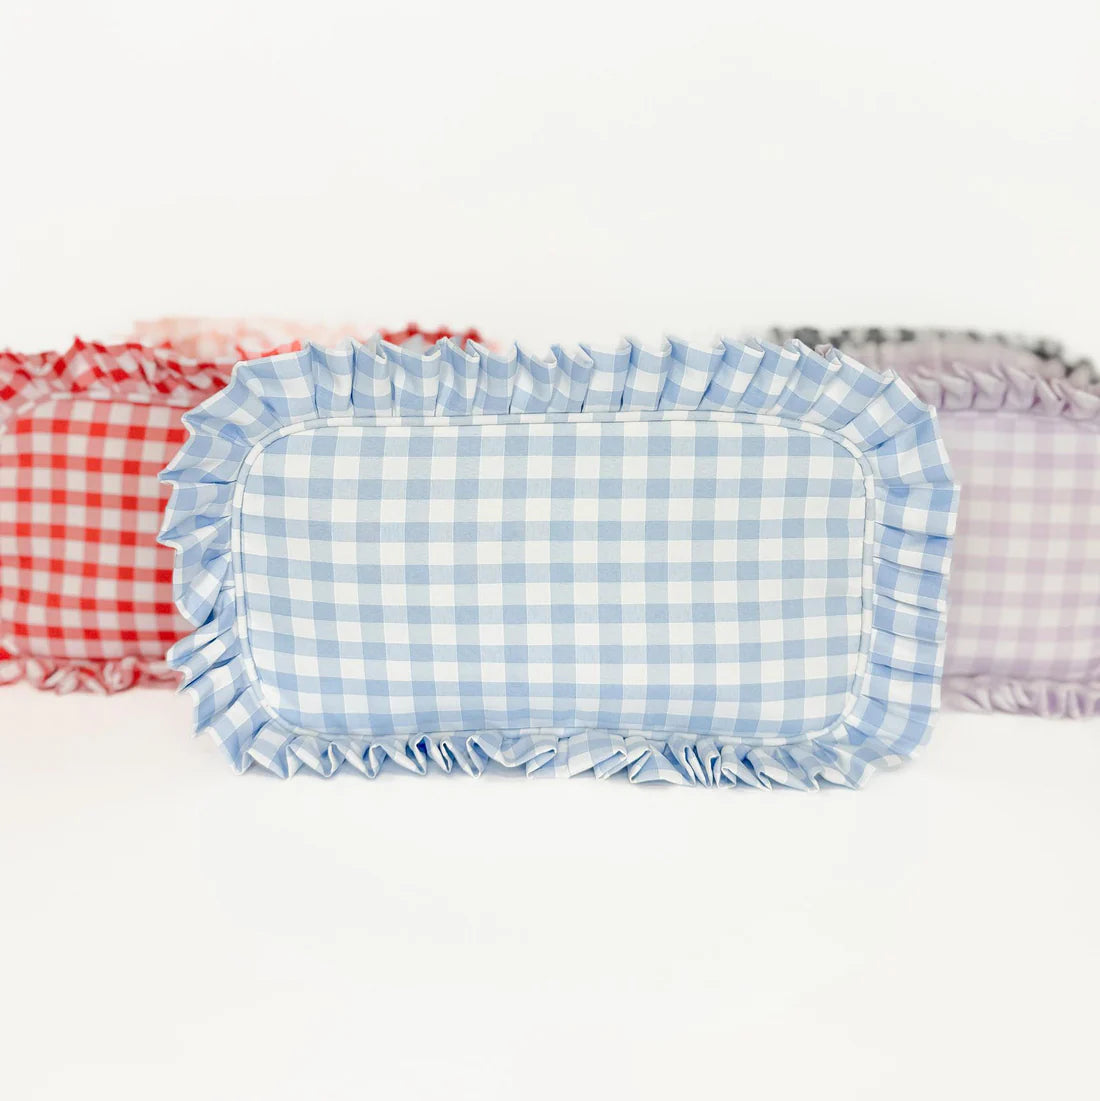 Gingham Frilly Bags - multiple colors